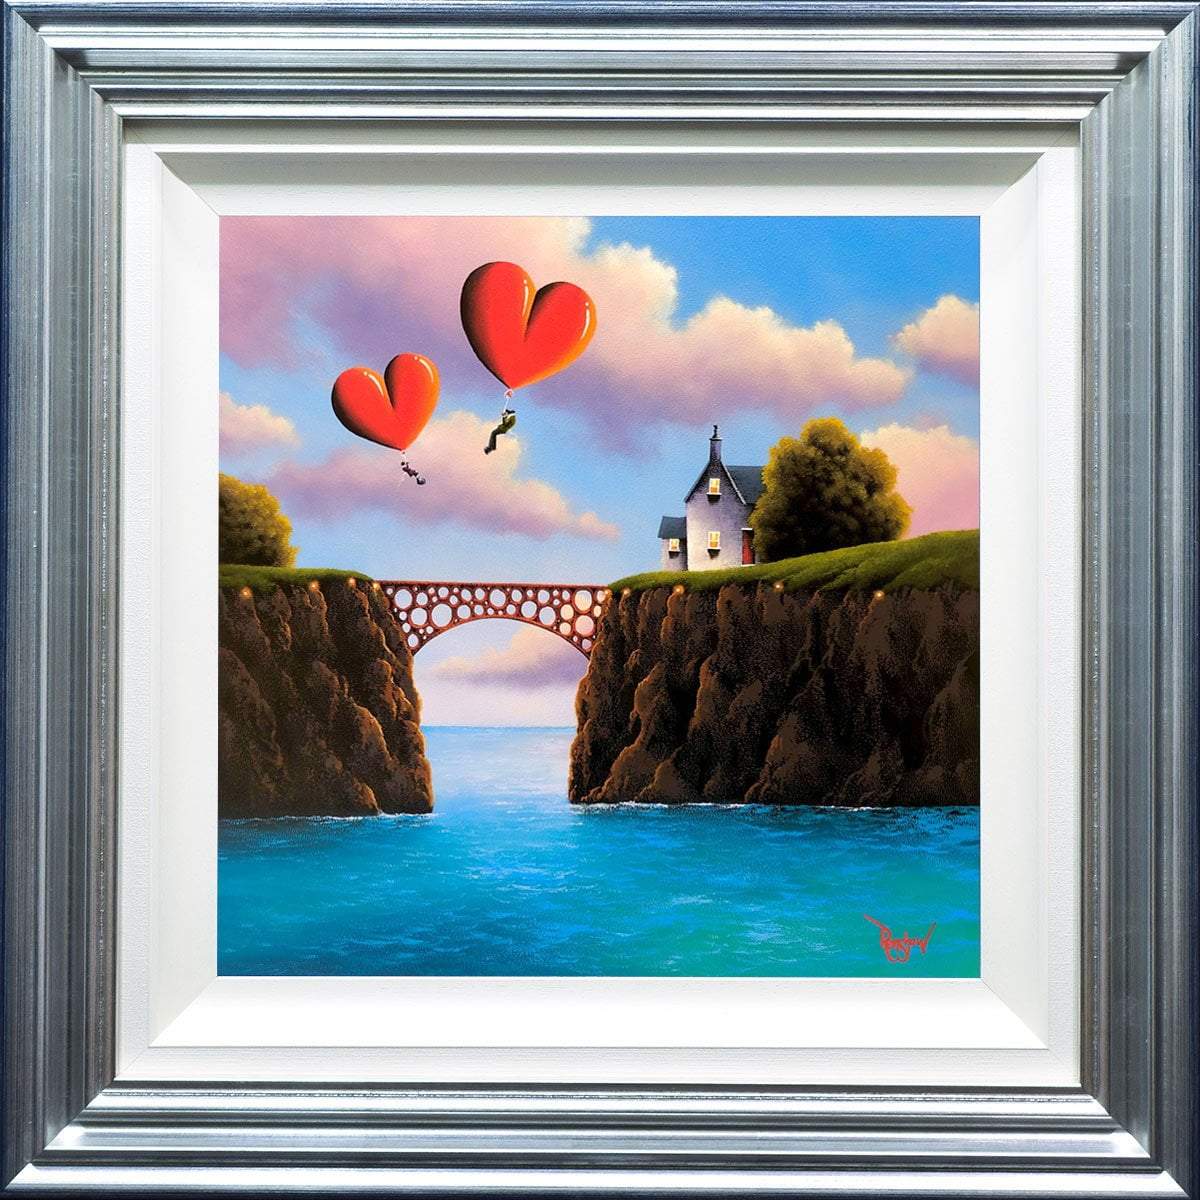 The Sky is the Limit - Original David Renshaw Framed